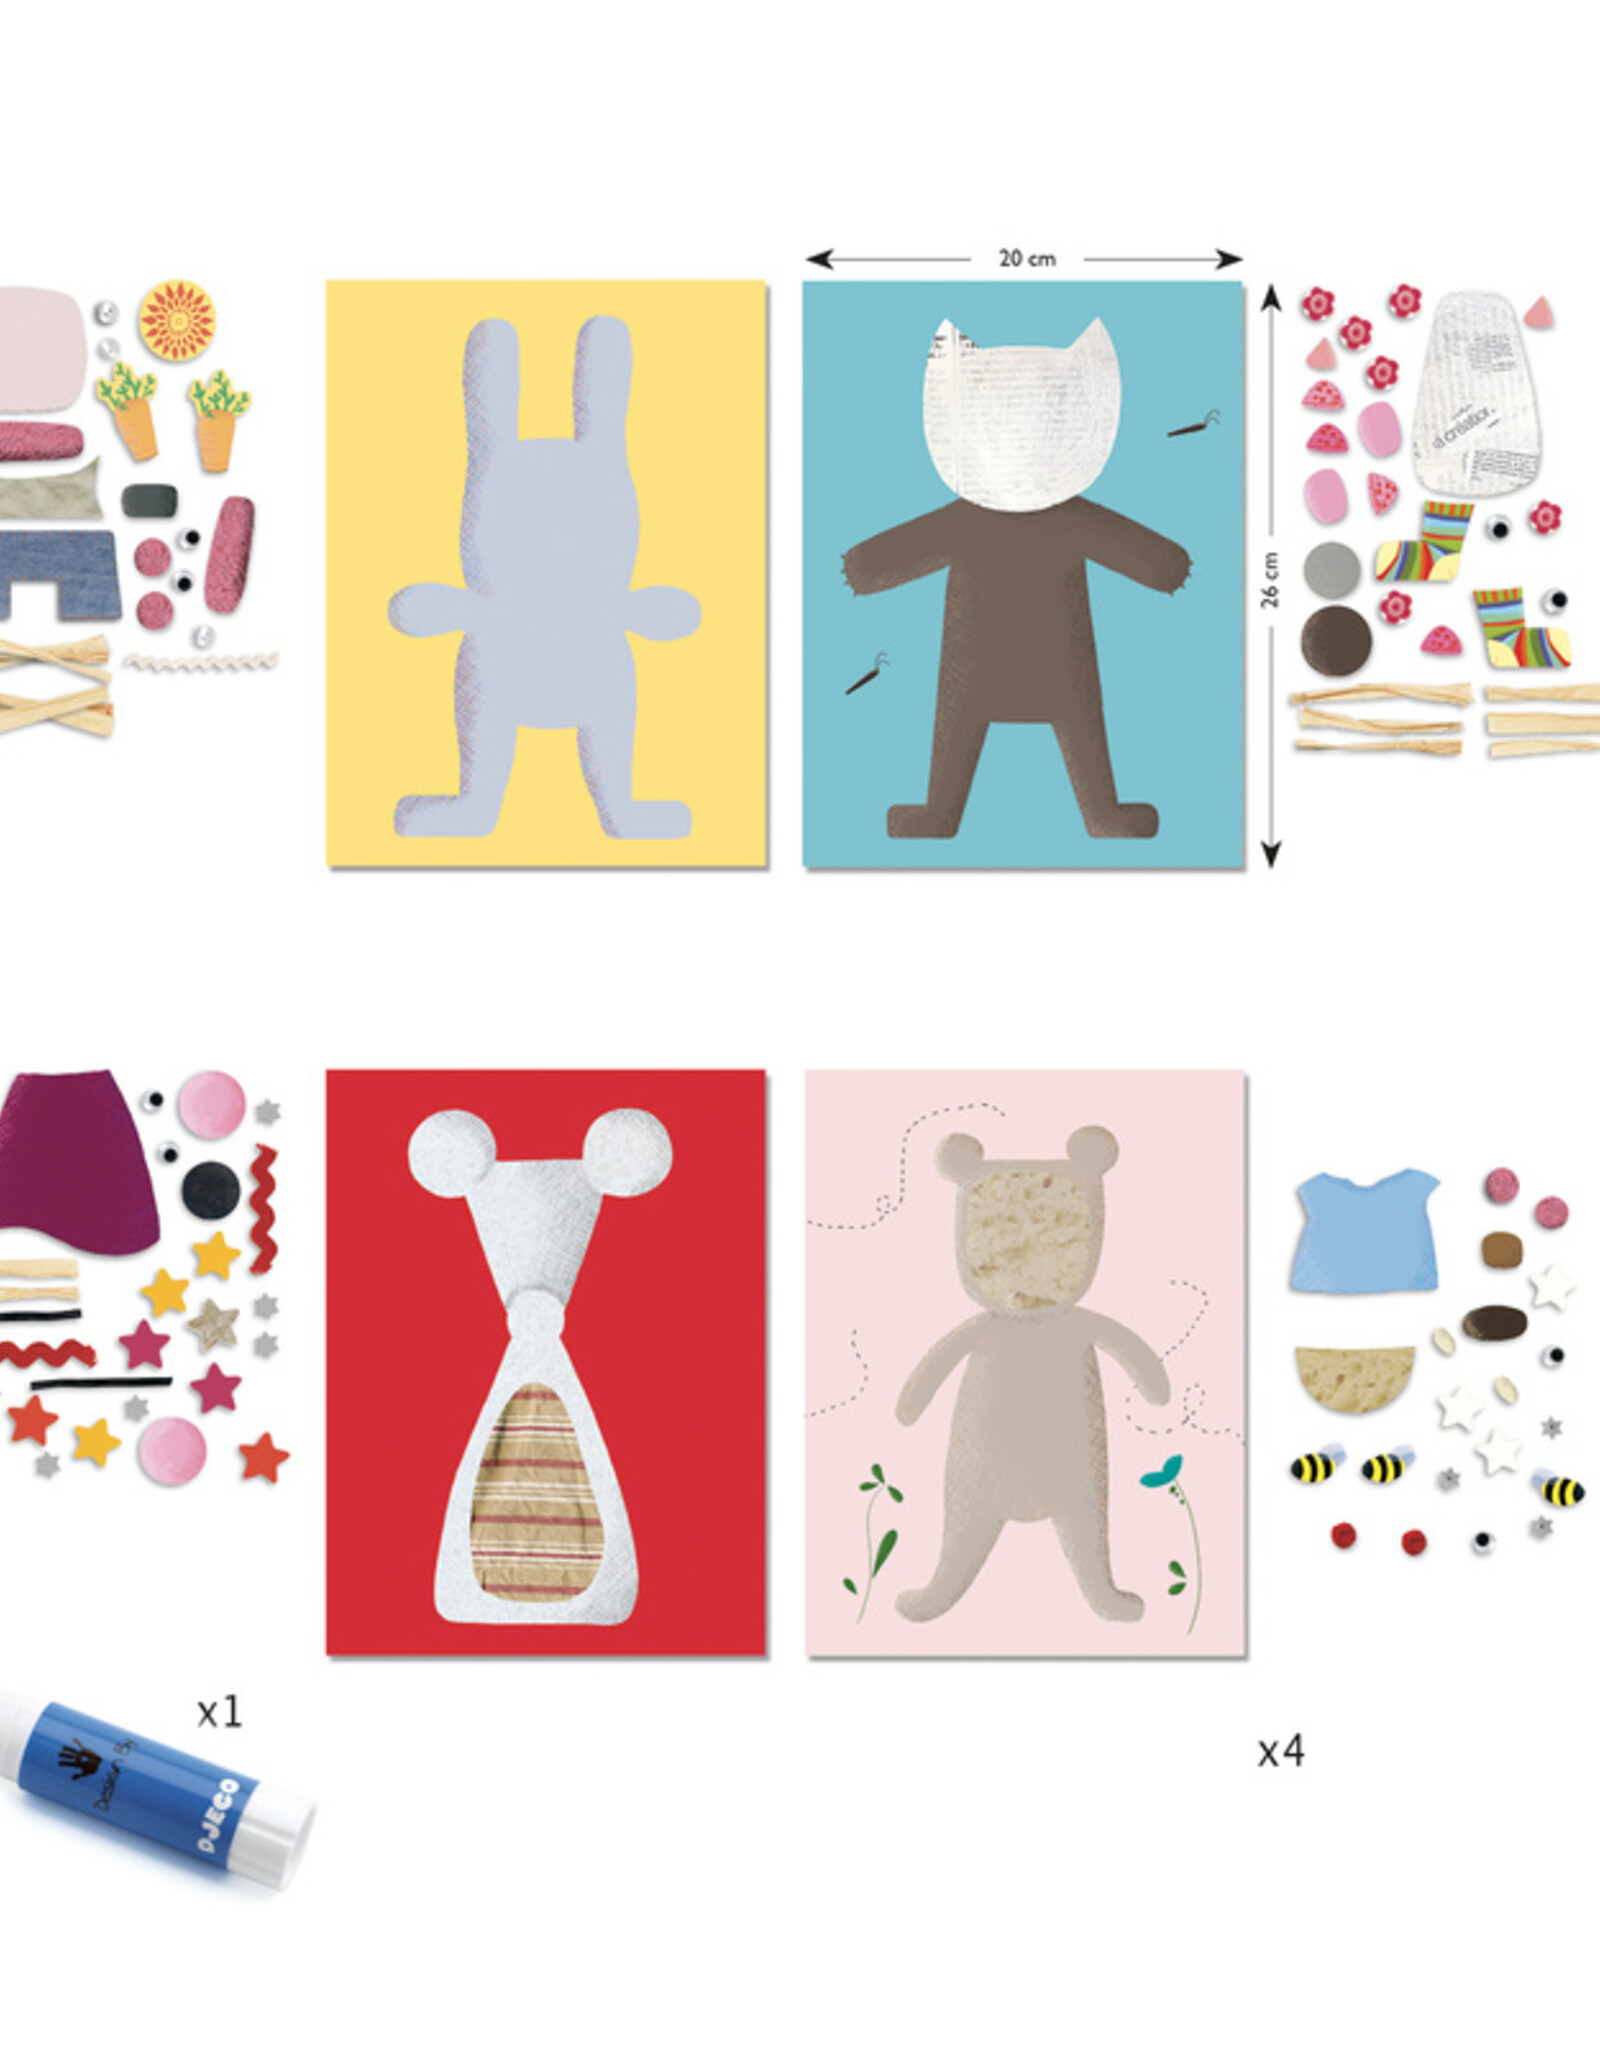 Djeco Djeco - Collages For Little Ones Set